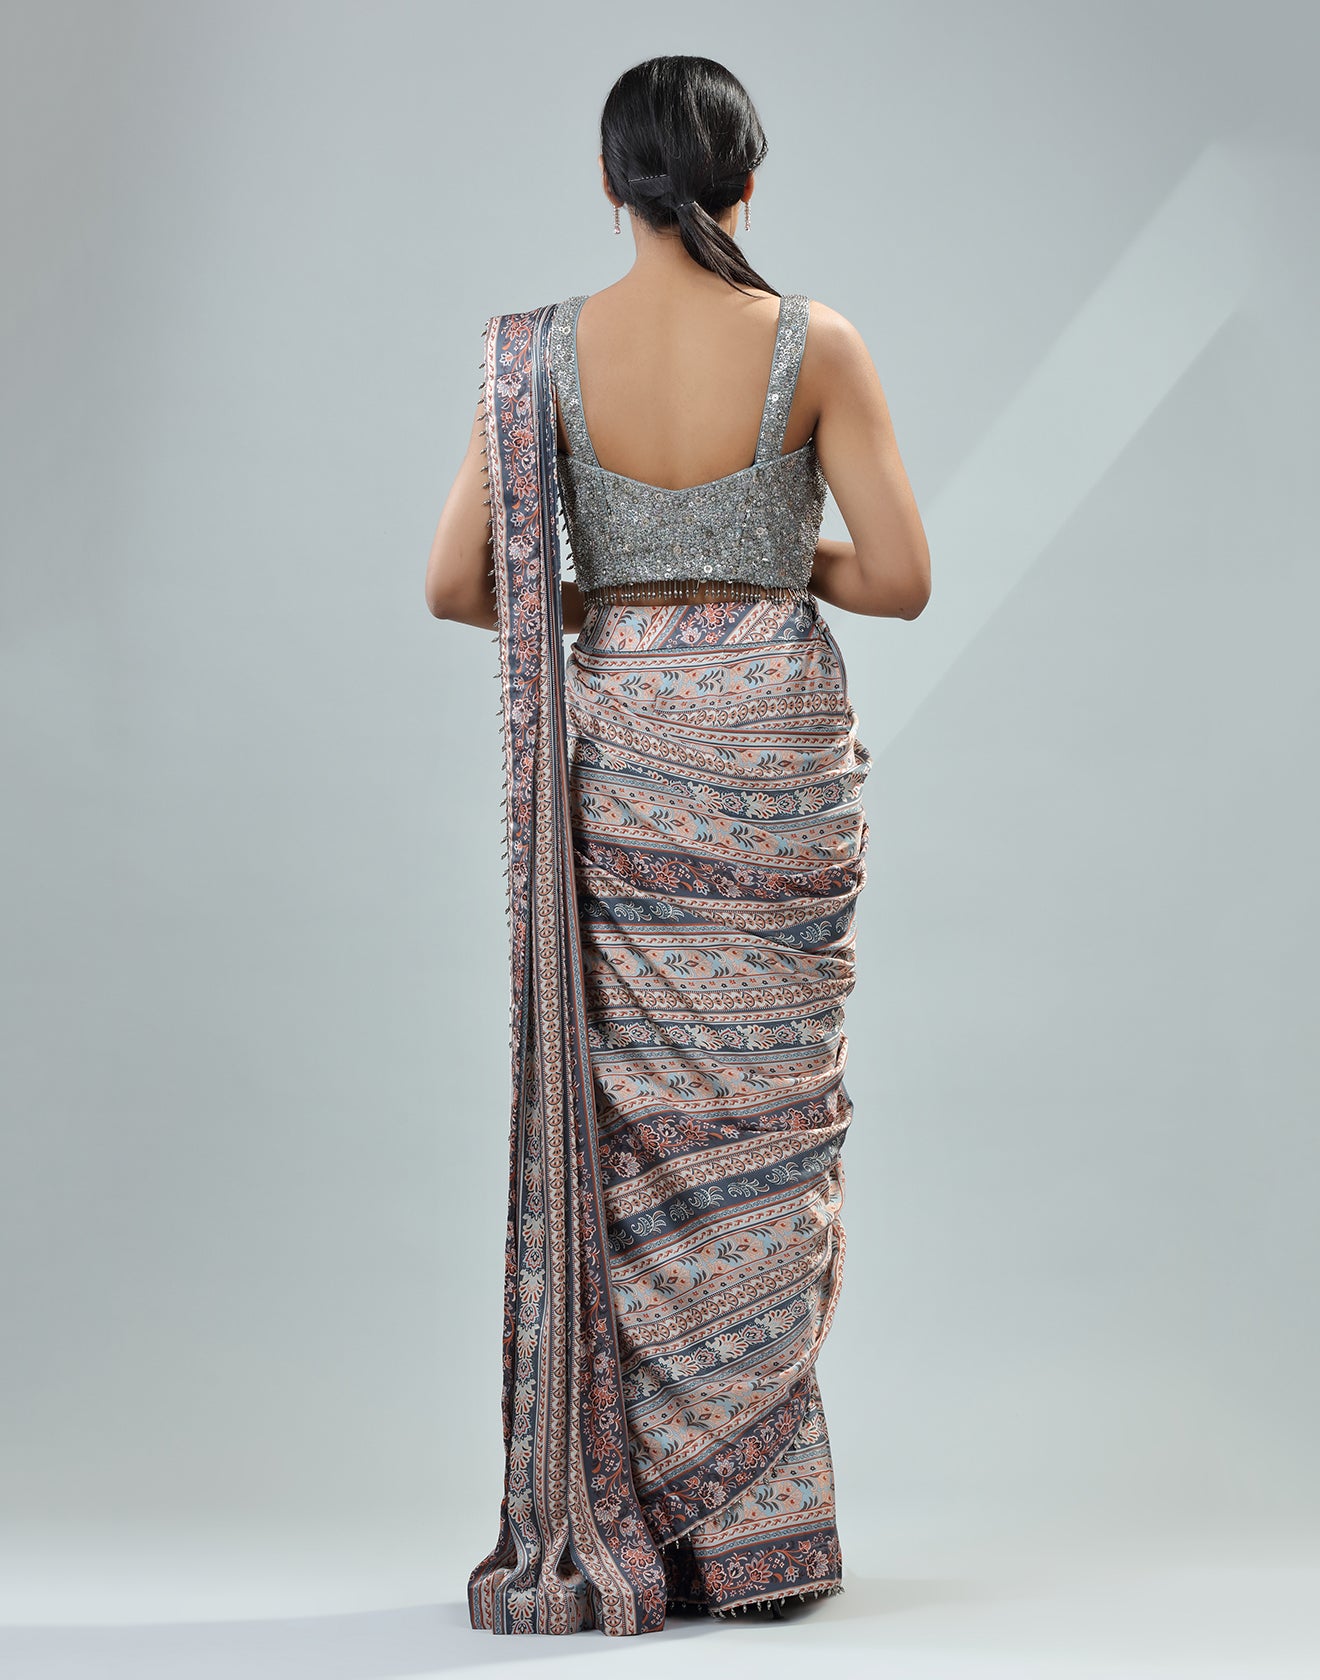 Classic Mocha Brown Pre-Stitched Saree With Embellished Blouse